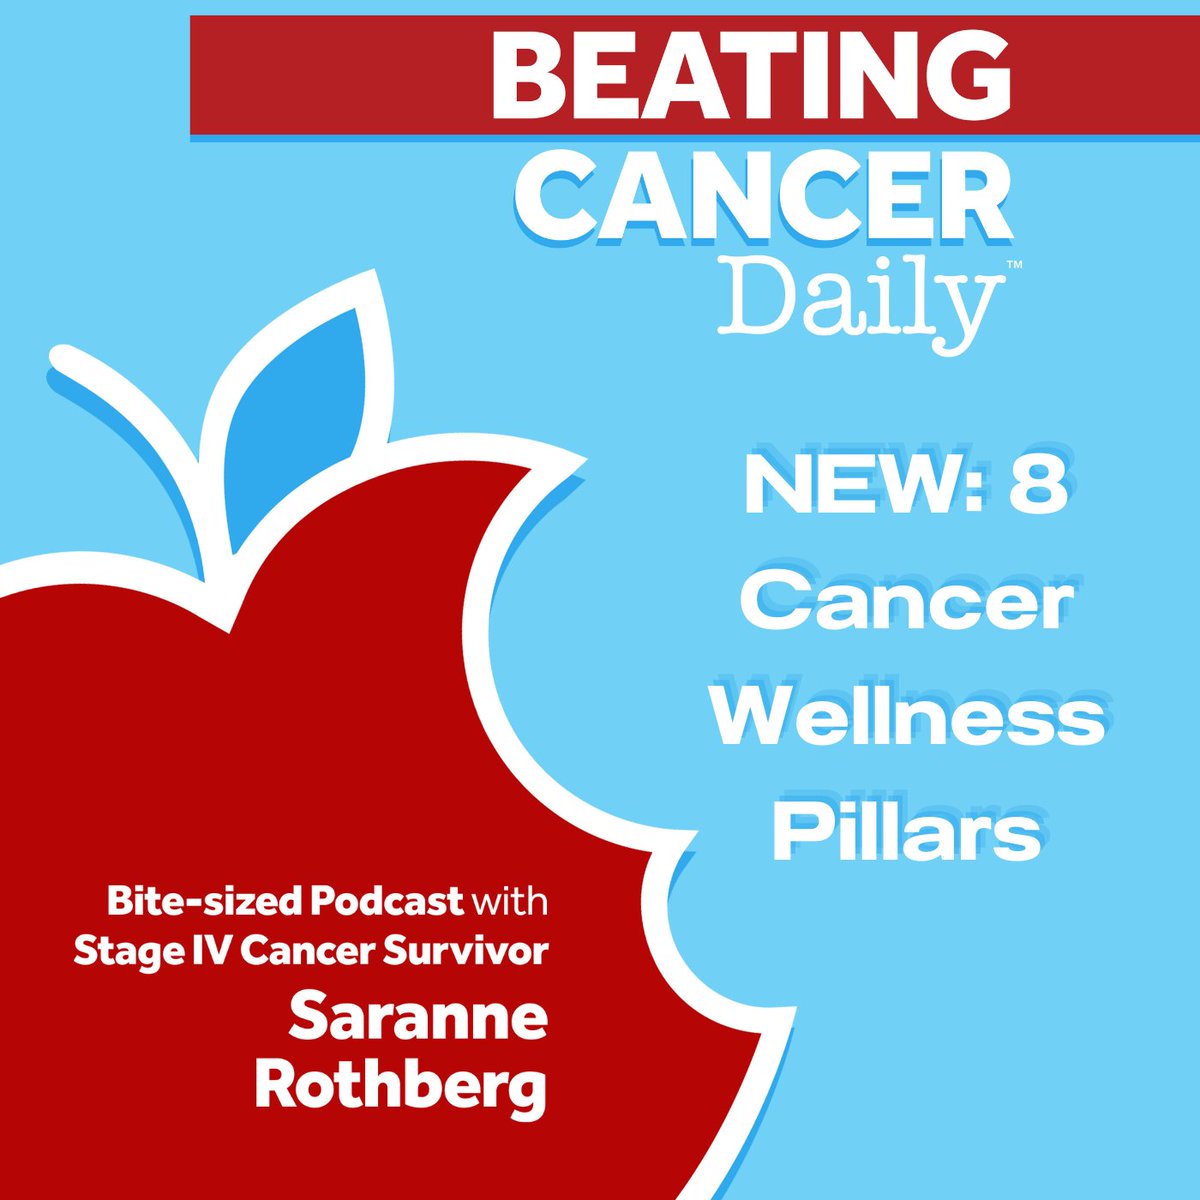 Today on #BeatingCancerDaily, Fan Favorite: 8 Cancer Wellness Pillars
Listen wherever you listen to podcasts.
ComedyCures.org

#ComedyCures #LaughDaily #InstaLaugh #laughtherapy #NonProfit #nonprofitlife #standupcomedian #survivor #remission #cancersurvivor